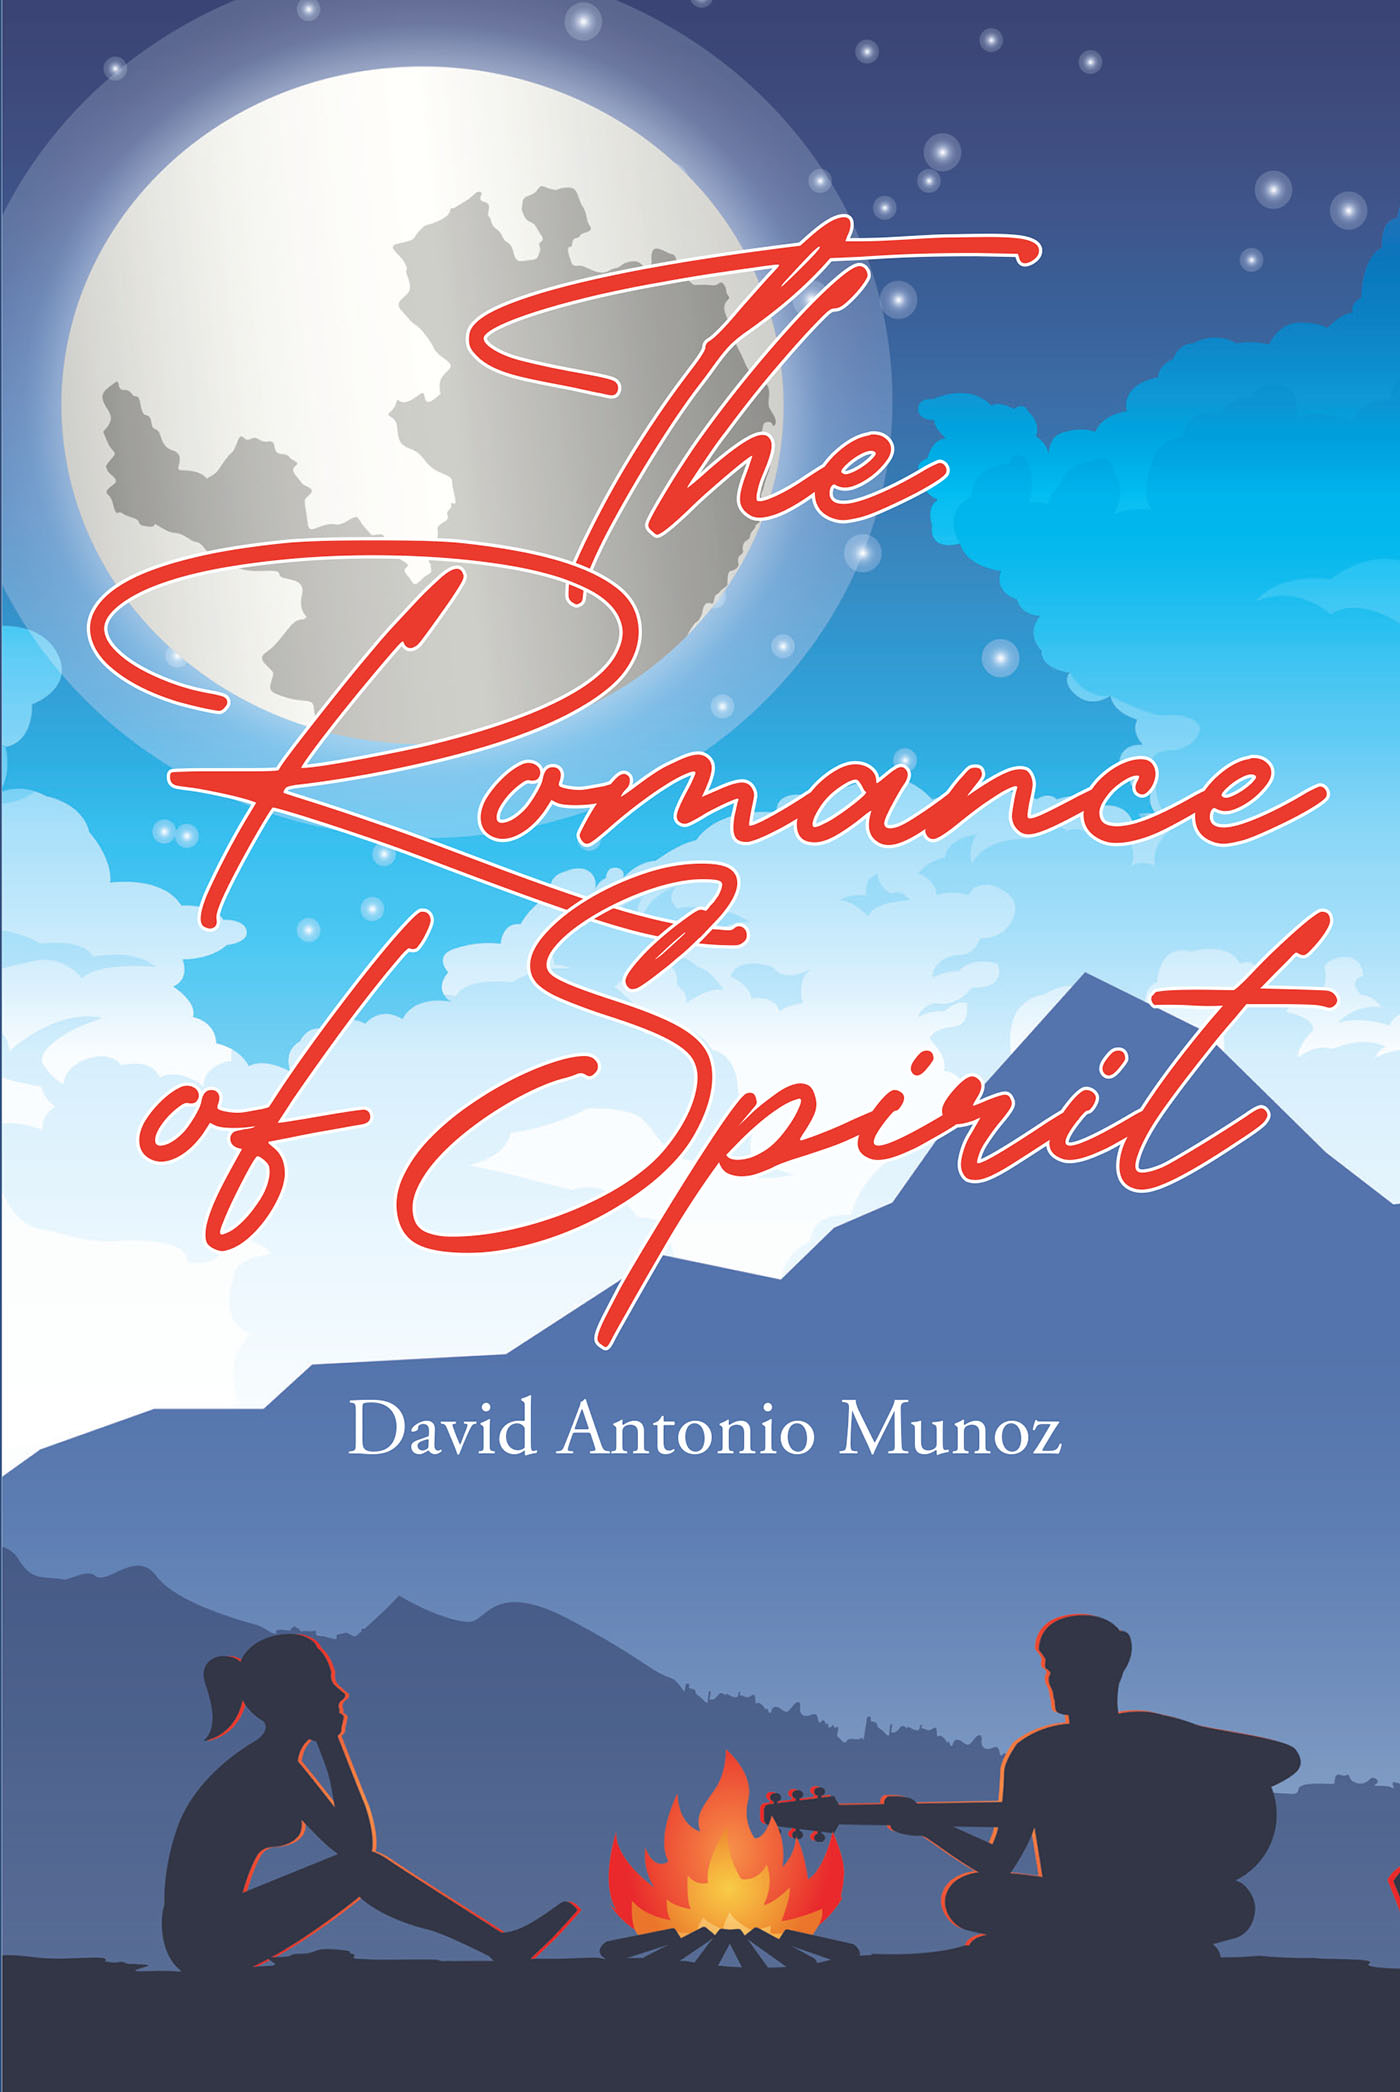 David Antonio Munoz’s Newly Released "The Romance of Spirit" is a Compelling Poetic Experience That Will Entertain and Inspire